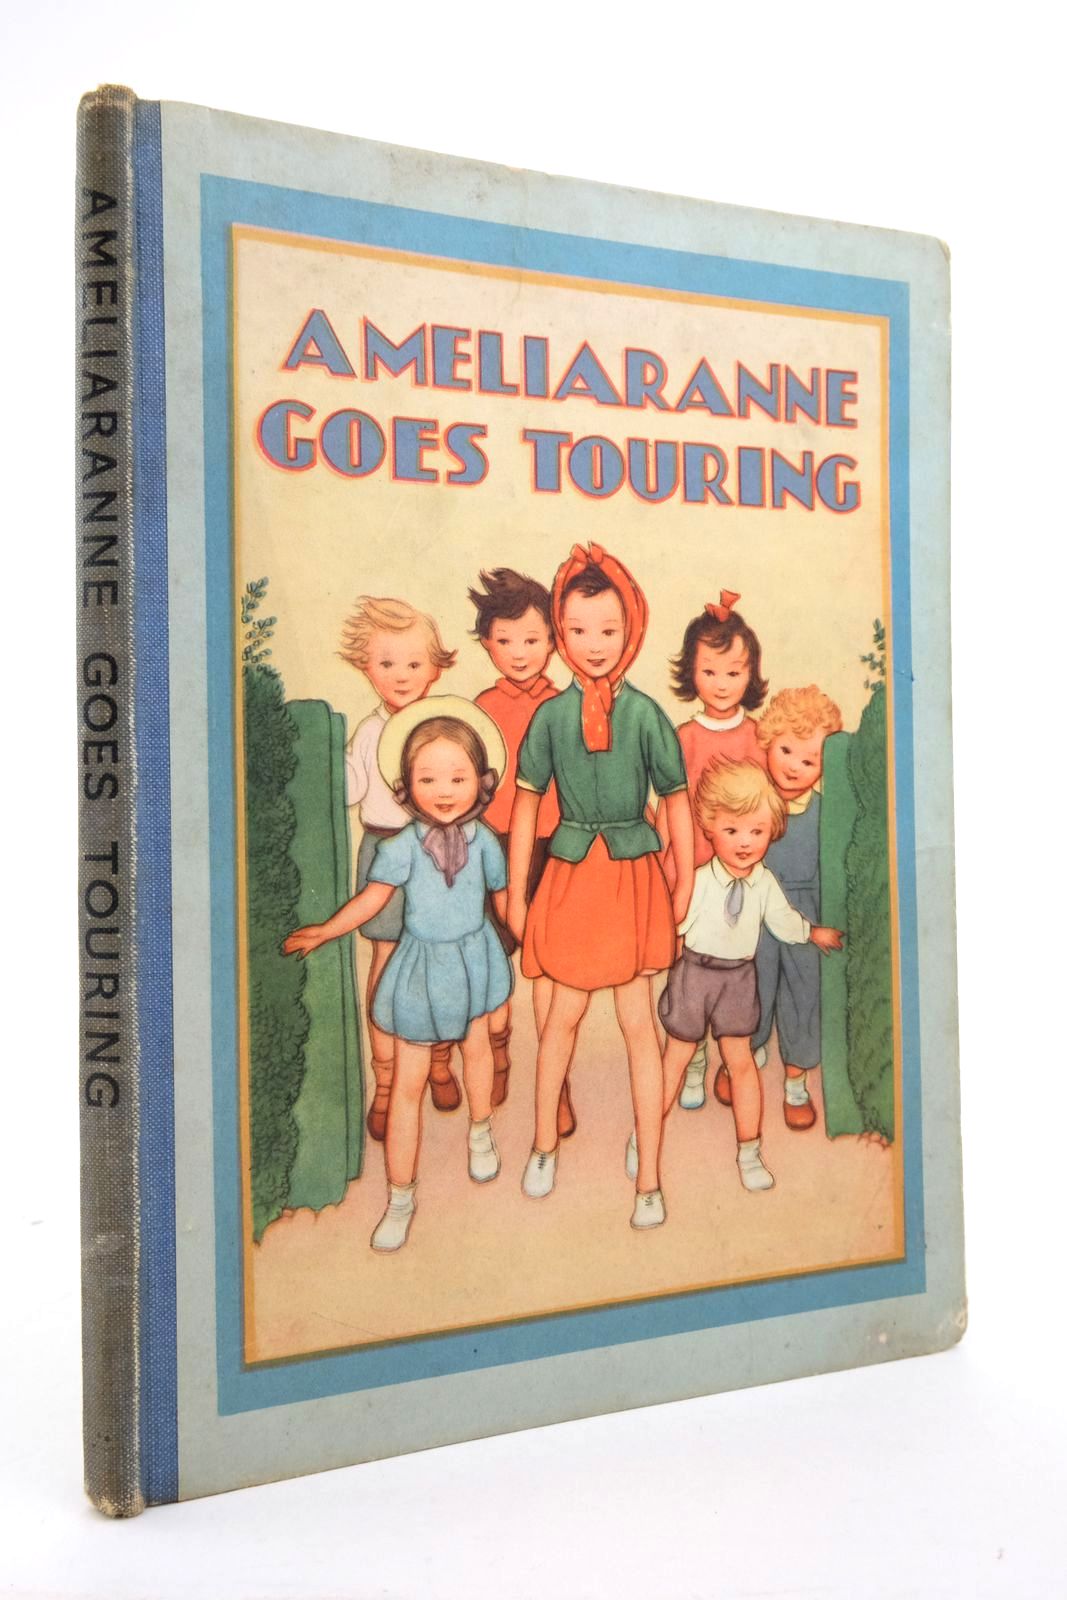 Photo of AMELIARANNE GOES TOURING written by Heward, Constance illustrated by Pearse, S.B. published by George G. Harrap &amp; Co. Ltd. (STOCK CODE: 2137181)  for sale by Stella & Rose's Books